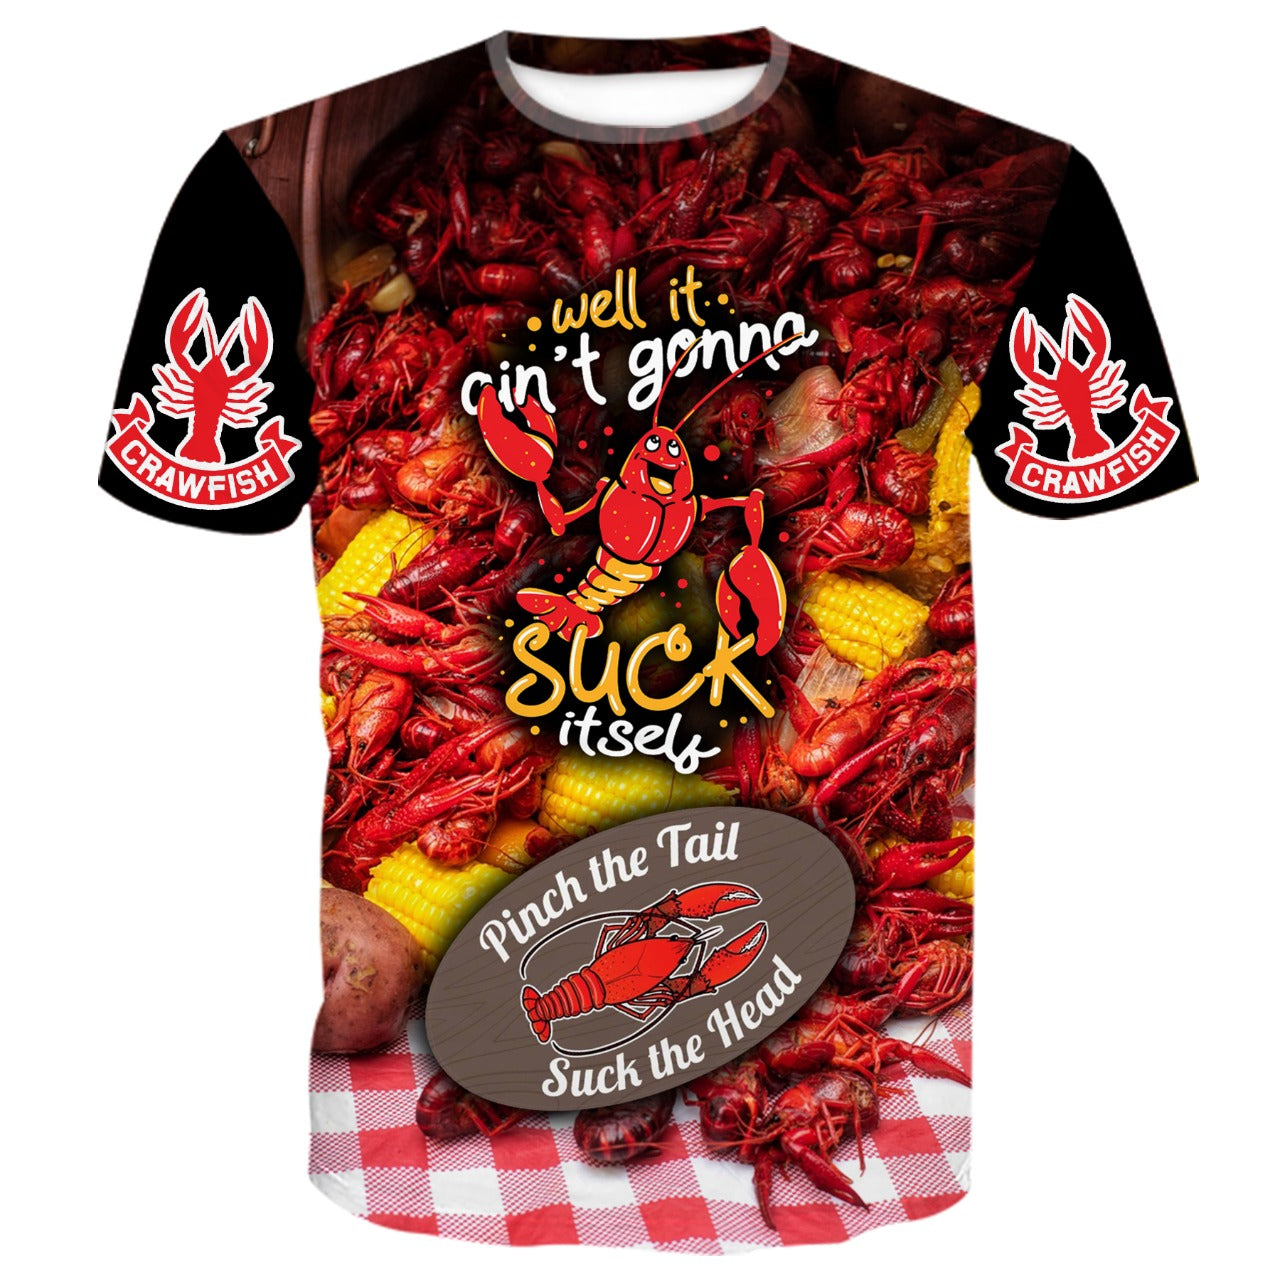 Crawfish with a chance of beer - T-Shirt - elitefishingoutlet